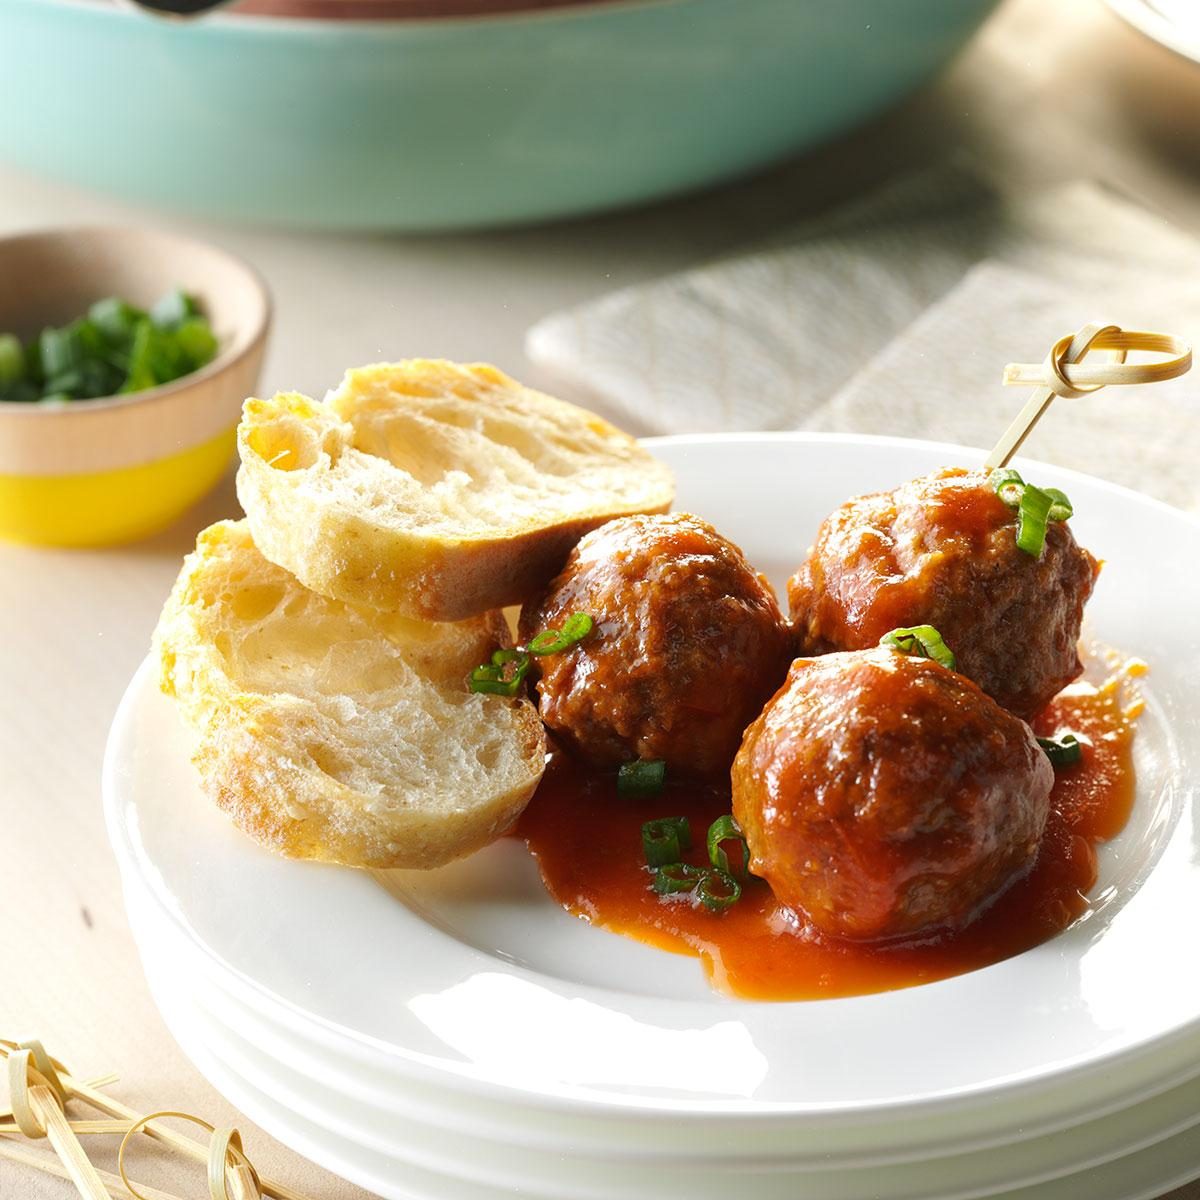 Wyoming: Slow Cooker Sweet and Sour Meatballs